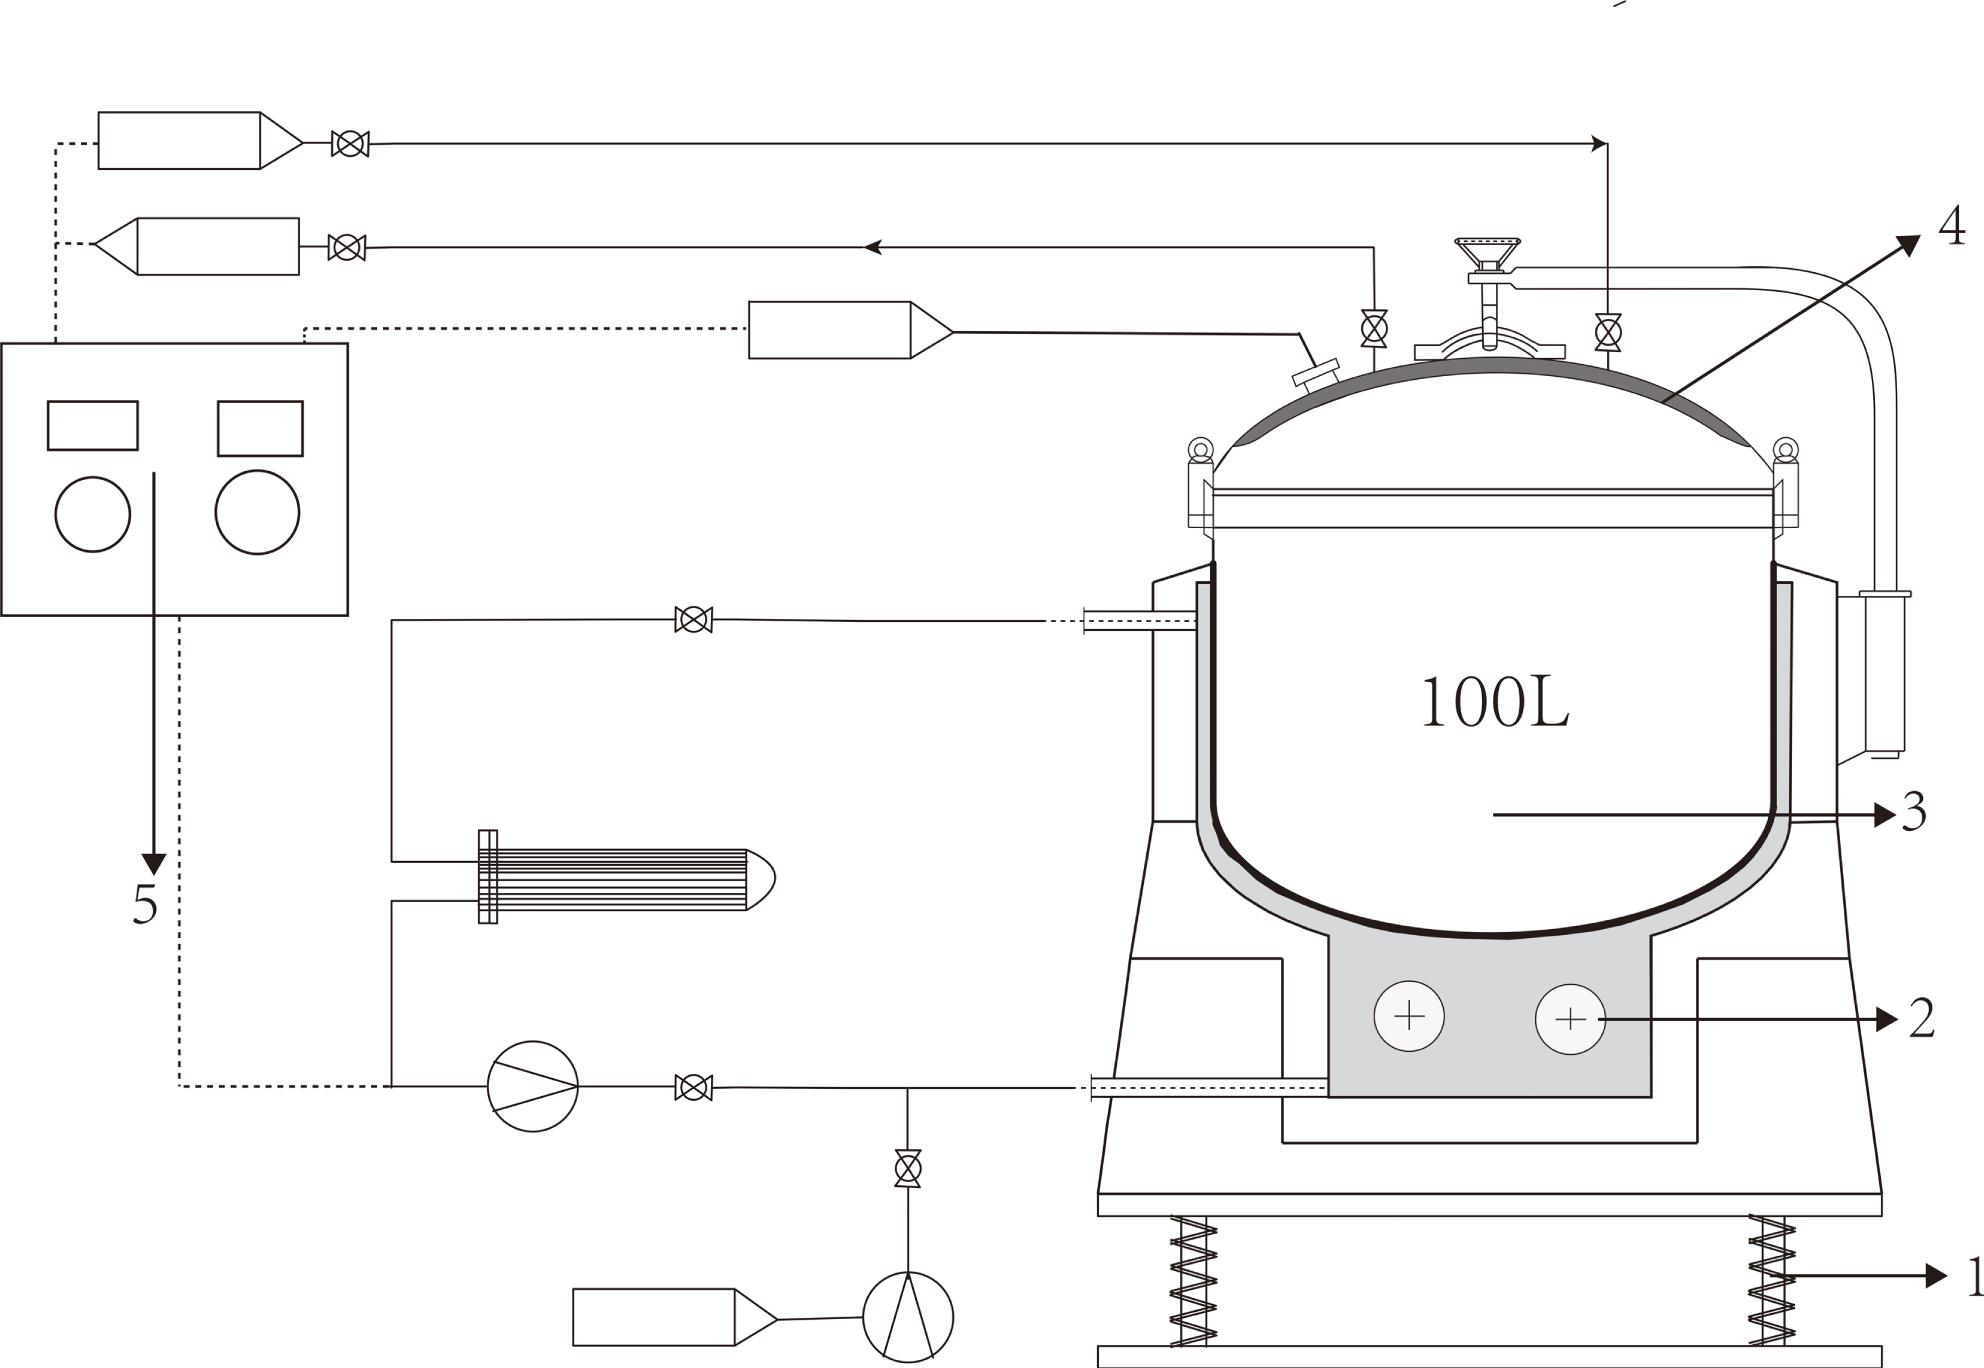 Schematic of the 100 L synthesis tank device. 1, vibrating table; 2, heating unit; 3, synthesis container; 4, cooling system; 5, control system.